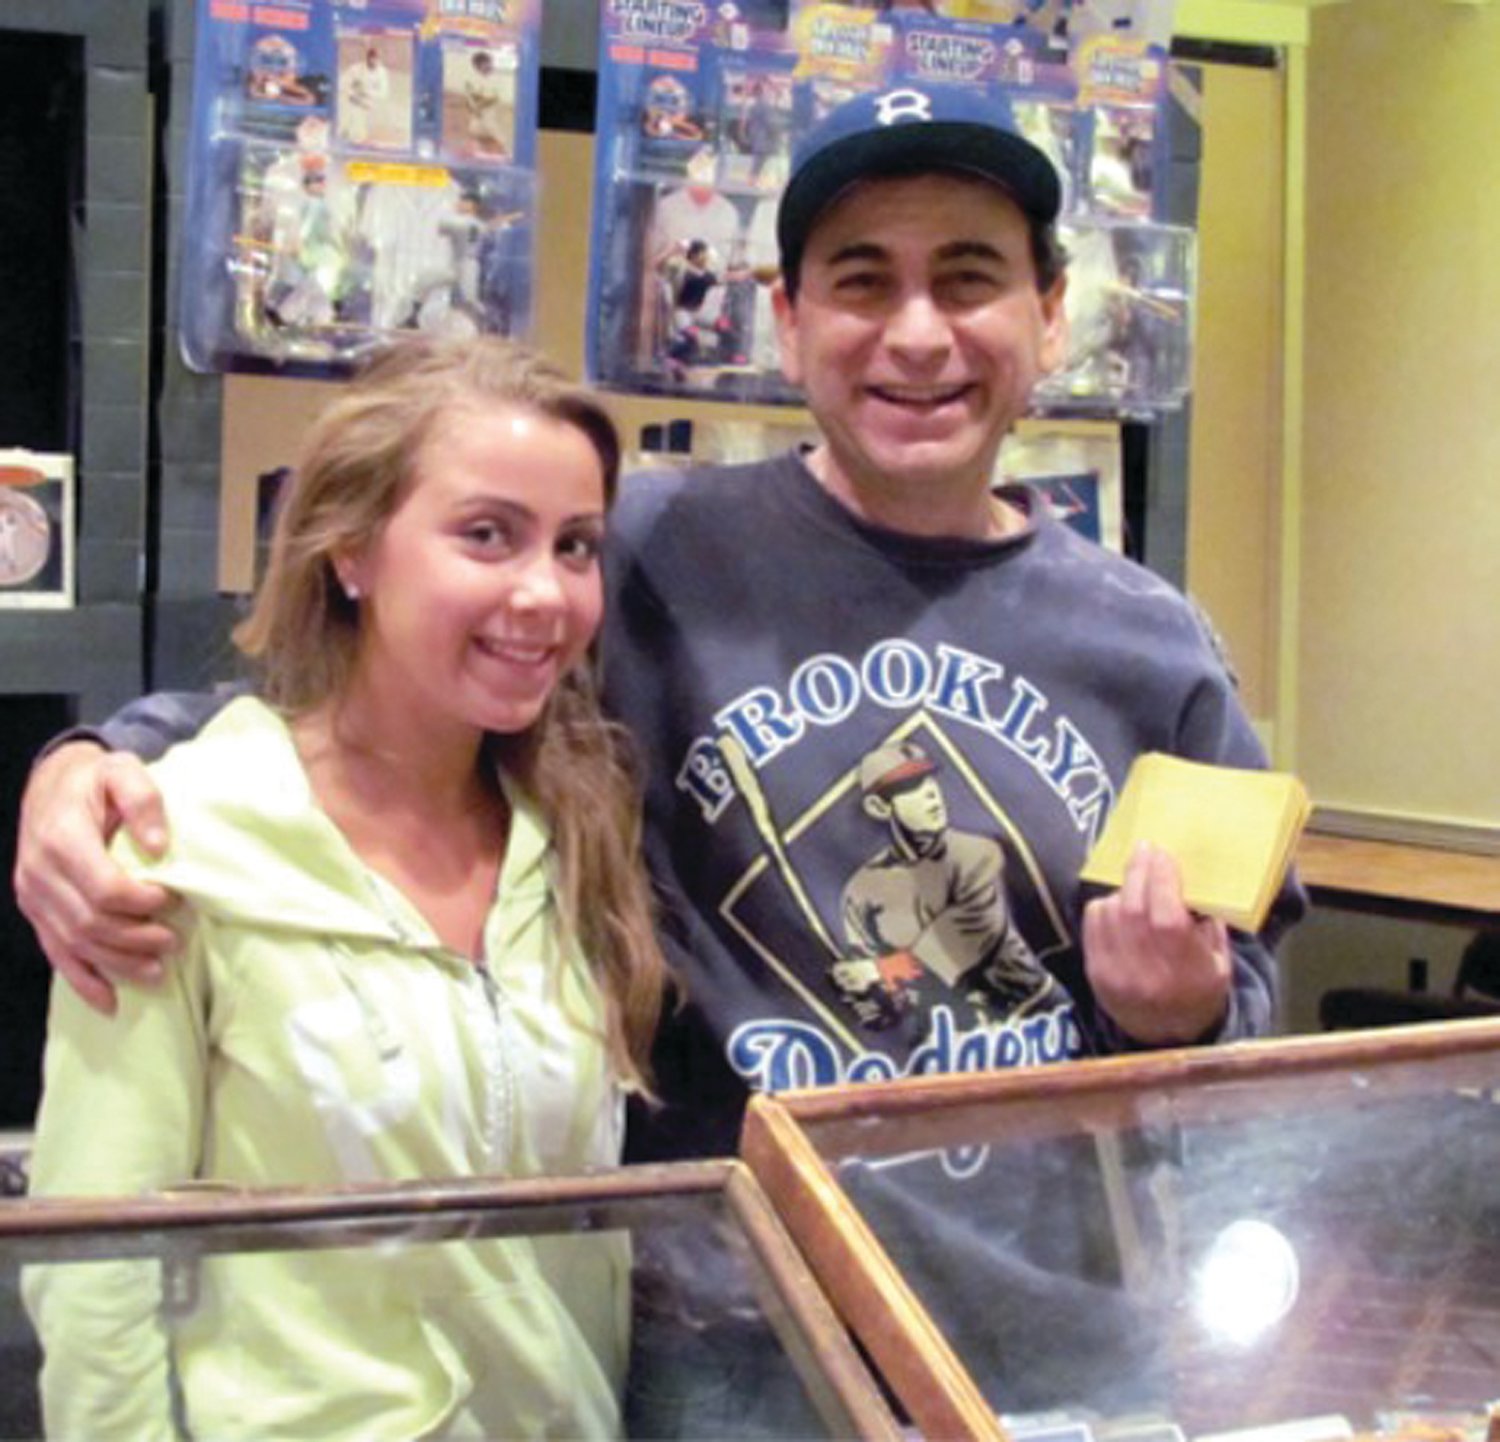 PROMOTER: Before Mike Mangasarian was a promoter, he was a dealer holding the most prominent first three tables at the entrance of the Cranston Card Show. He is seen here with his 17-year-old daughter Margo in 2012 at the West Valley Inn.